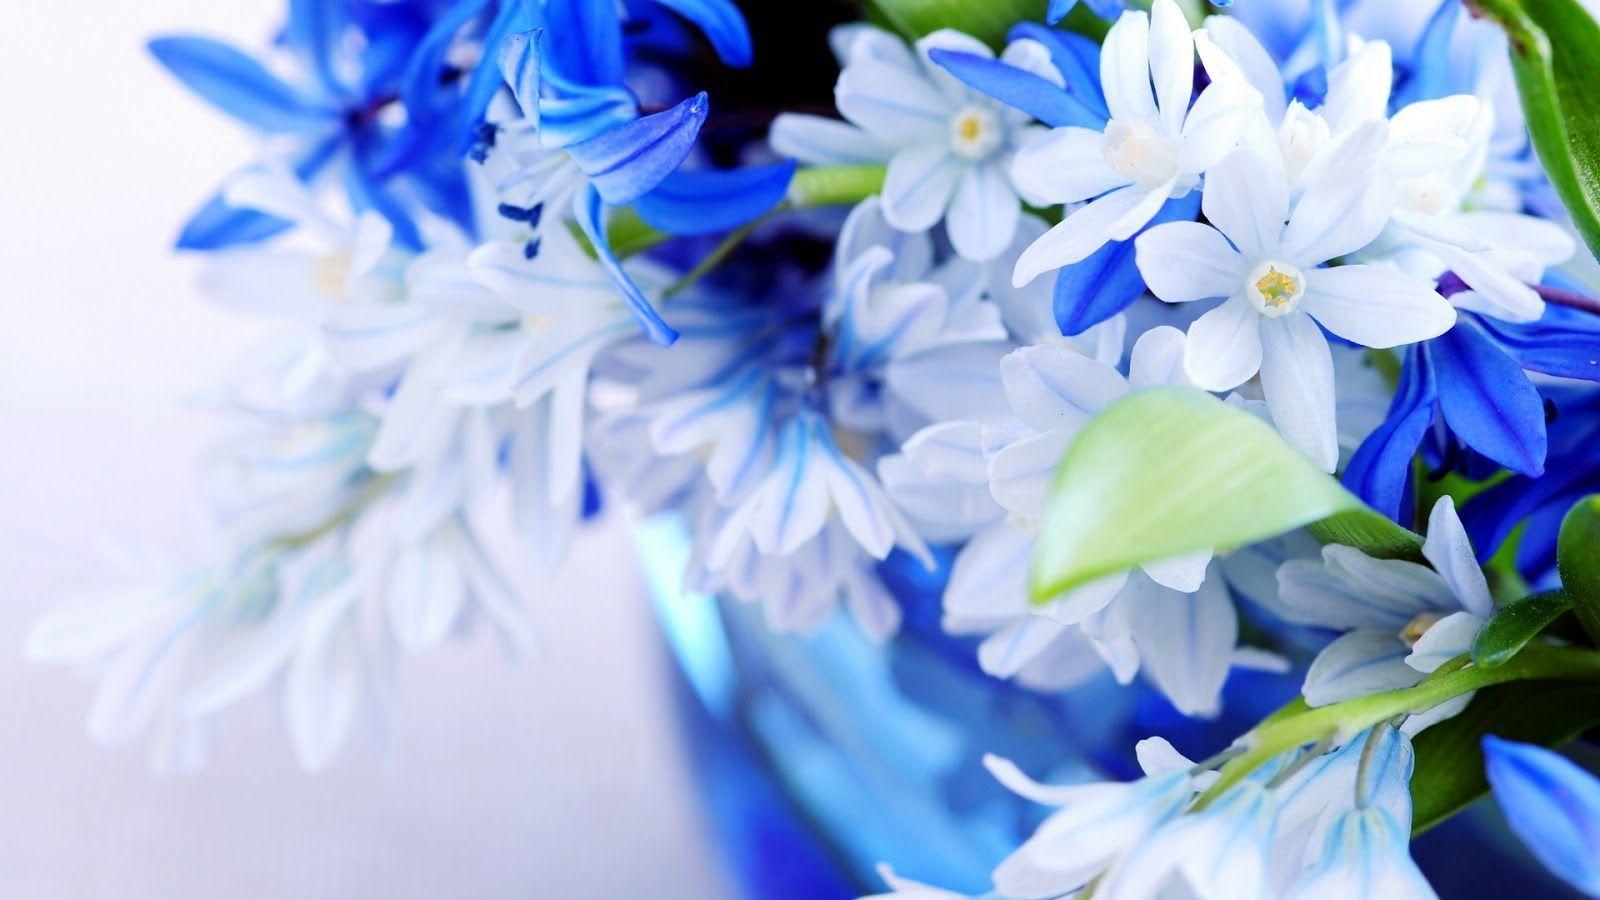 Pretty Flowers Wallpapers - Top Free Pretty Flowers Backgrounds ...